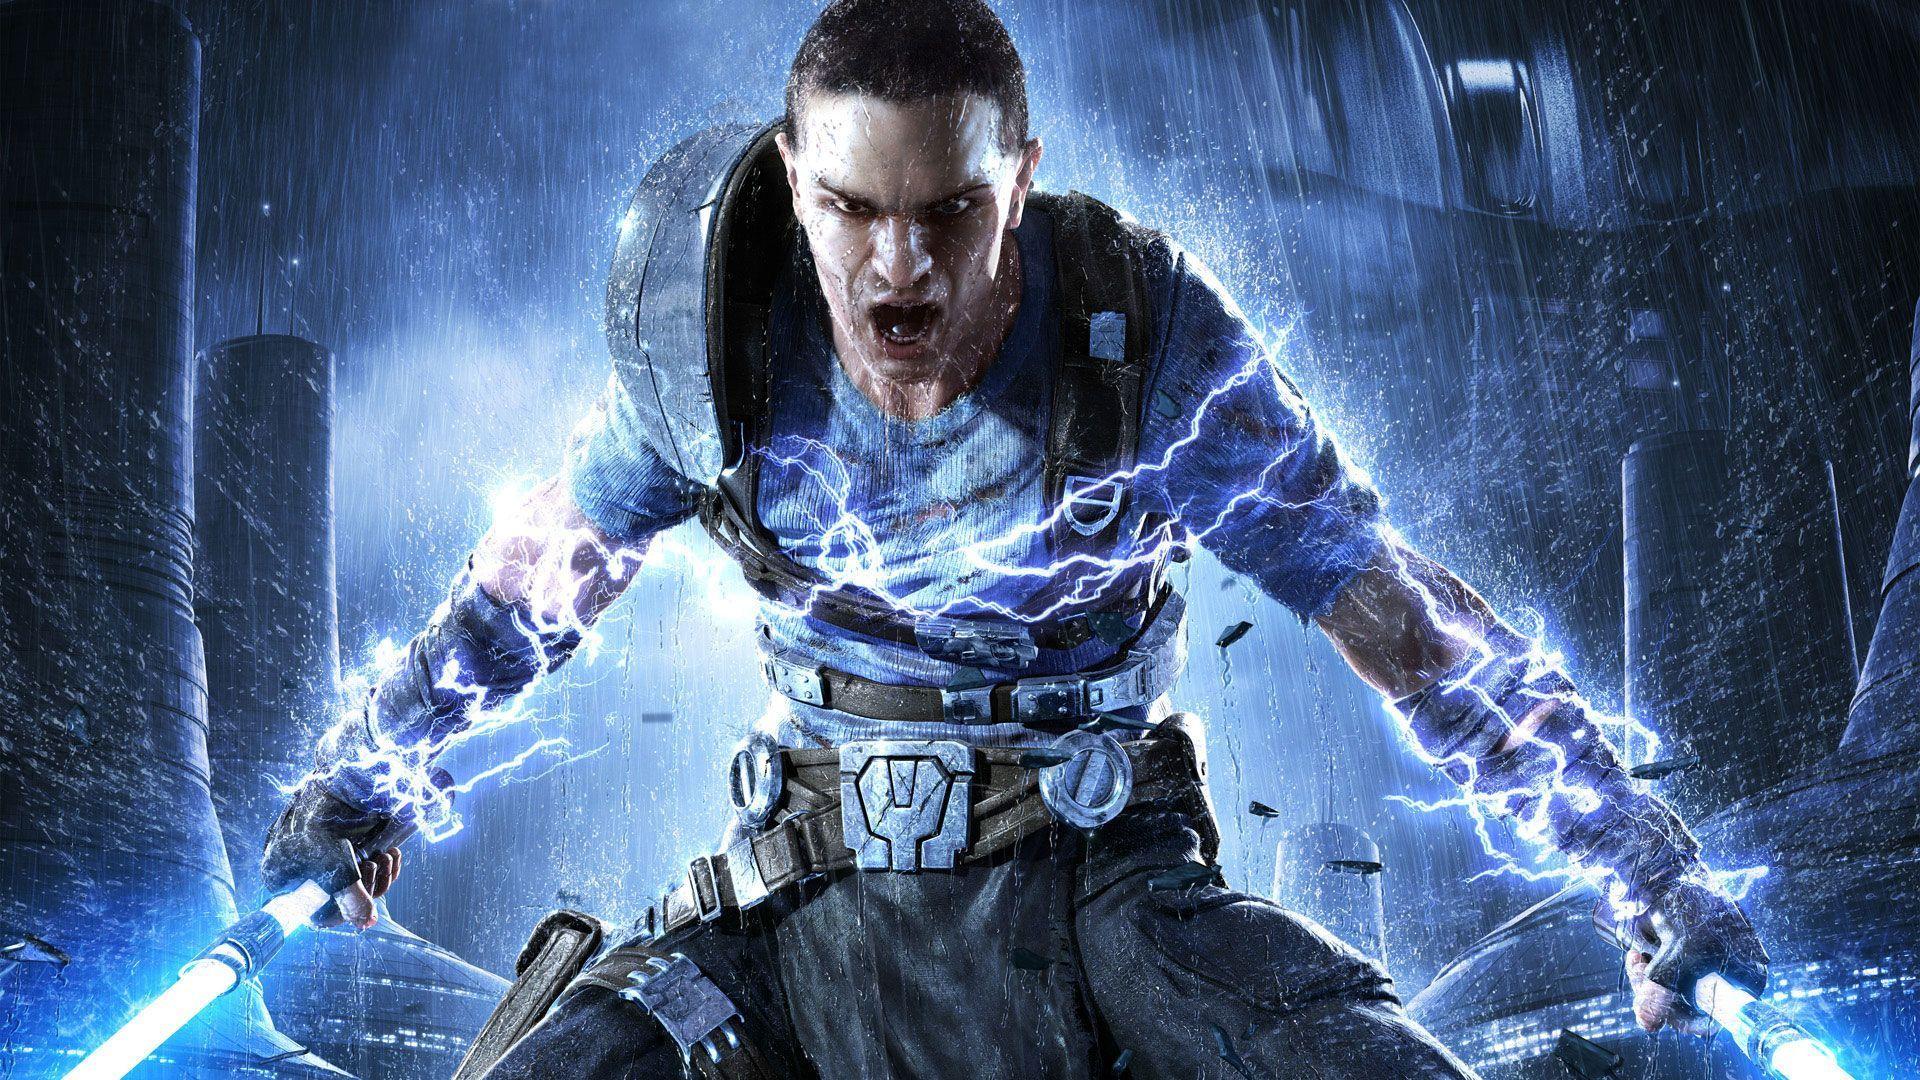 Star Wars: The Force Unleashed 2 Wallpapers in HD